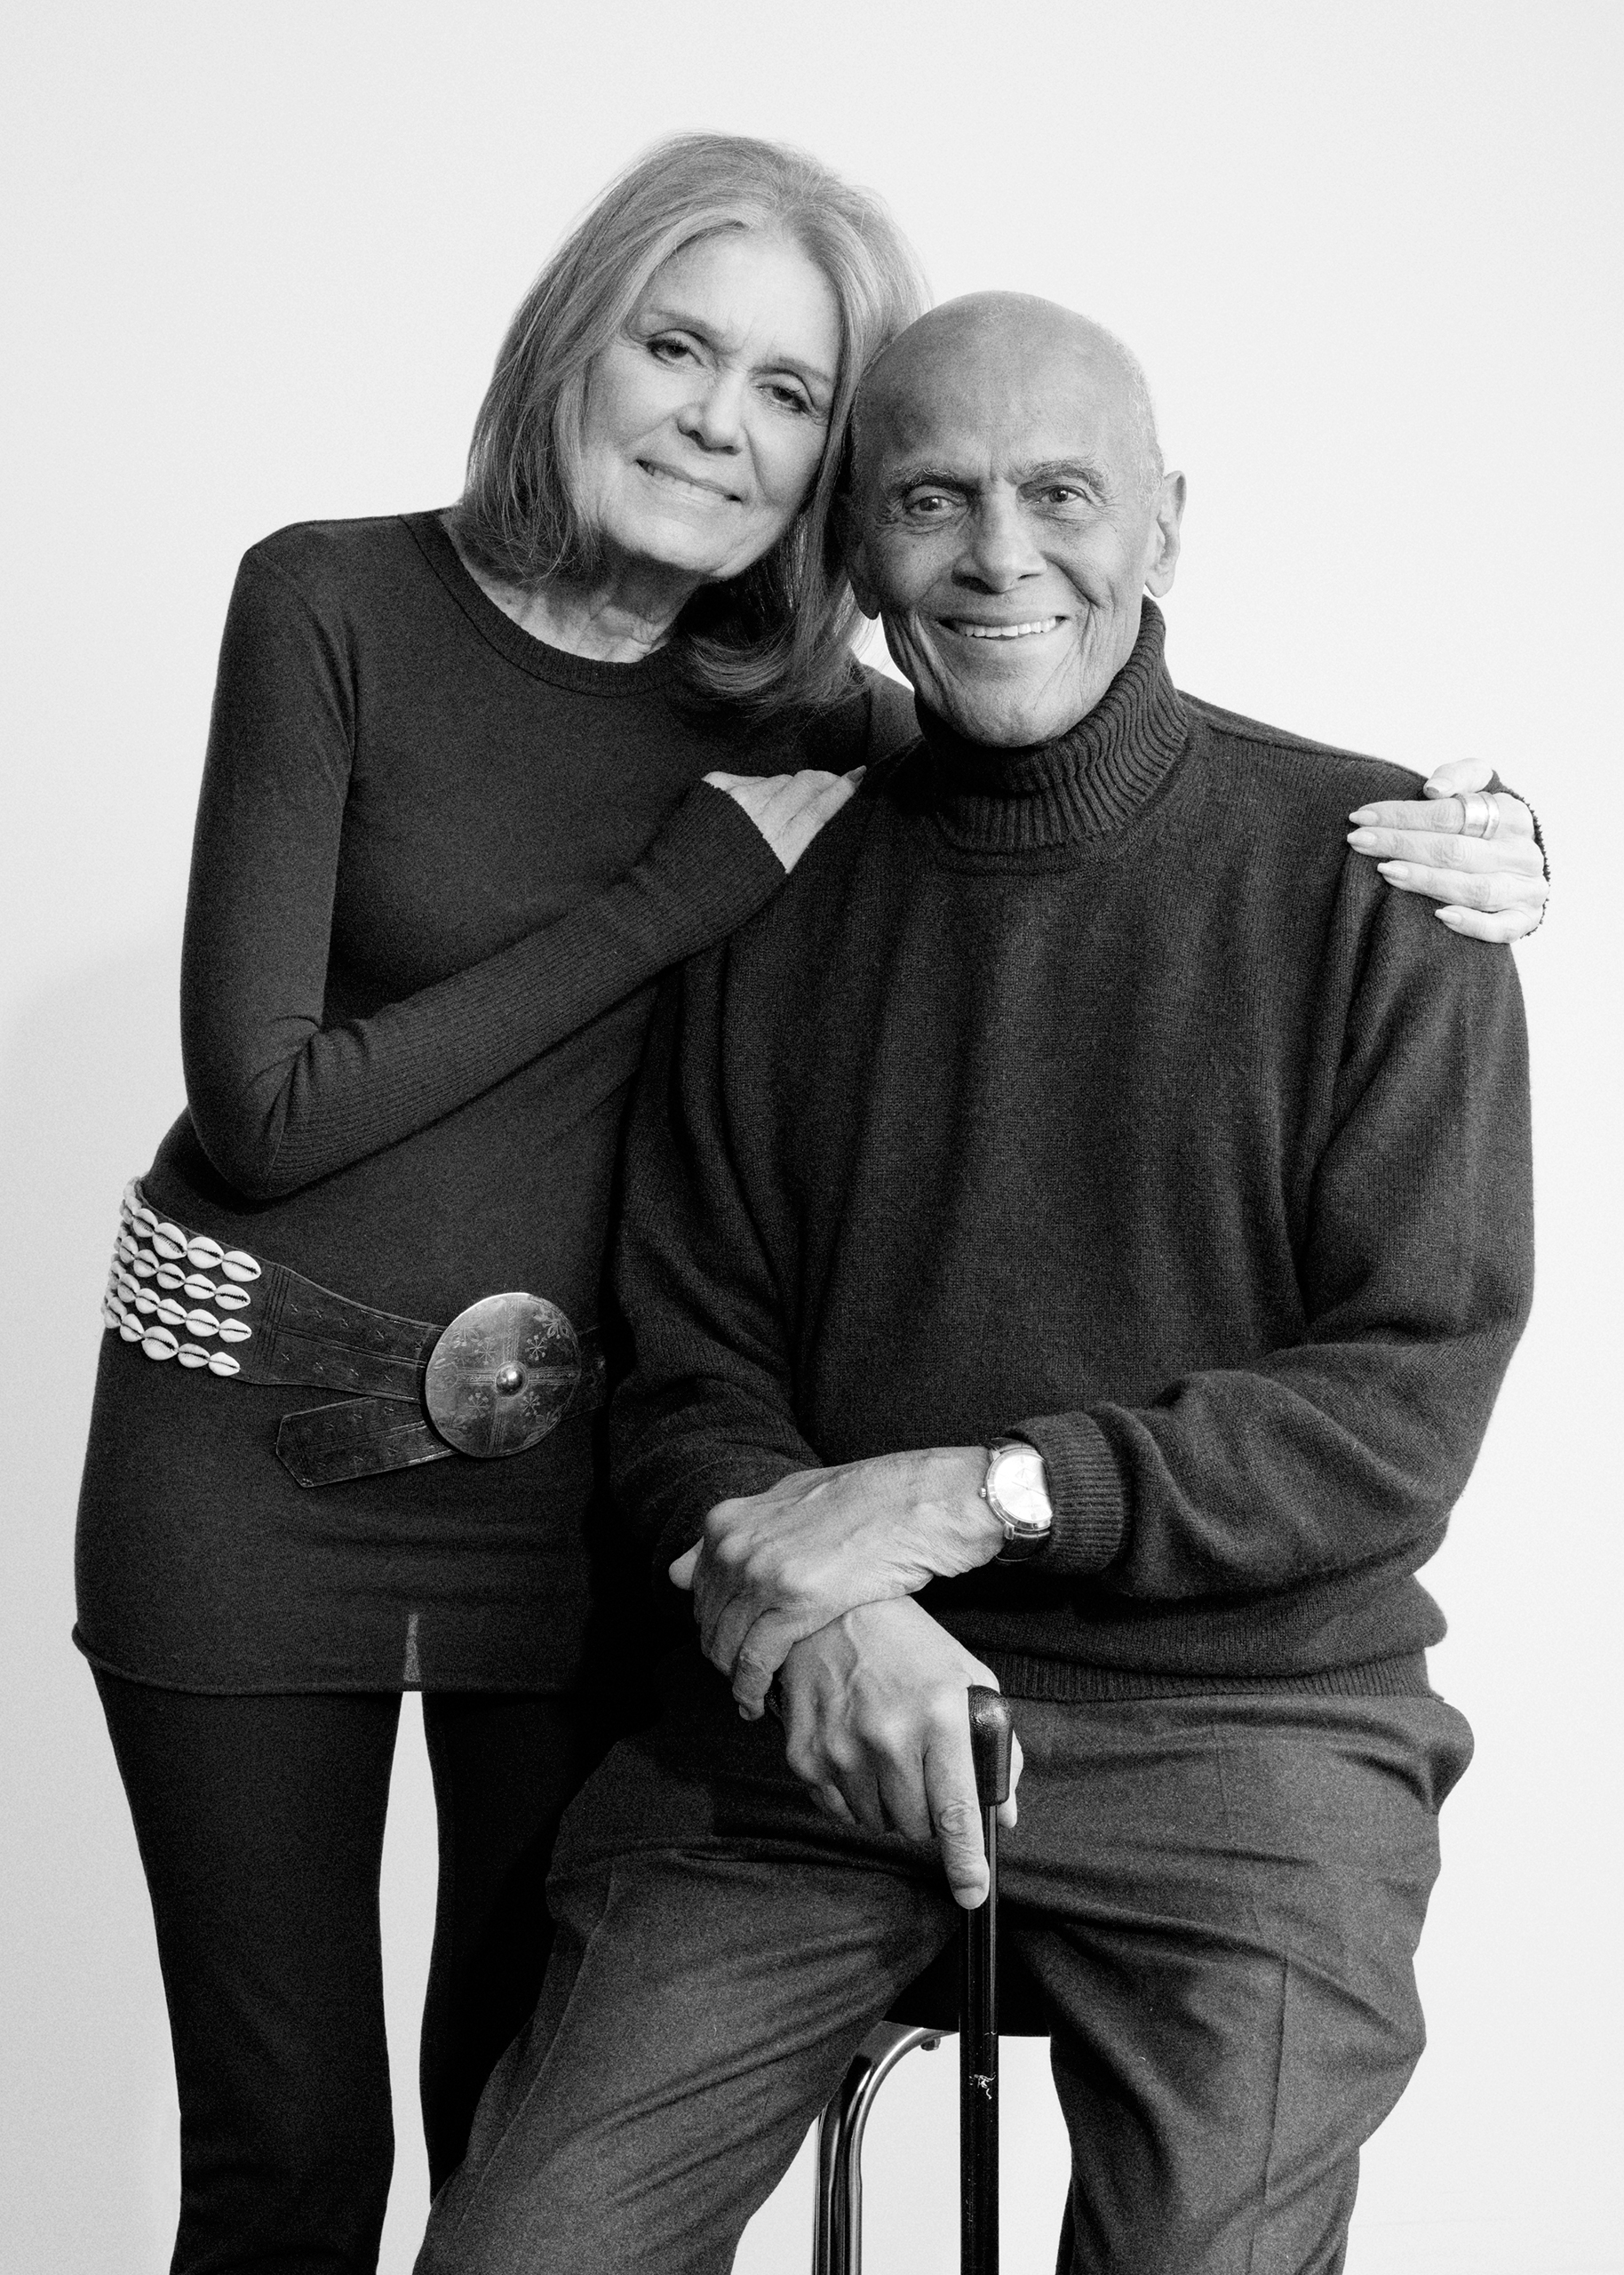 Honorary co-chairs for the Woman’s March on Washington. Gloria Steinem and Harry Belafonte in New York on Jan. 9, 2017 (Jody Rogac for TIME)